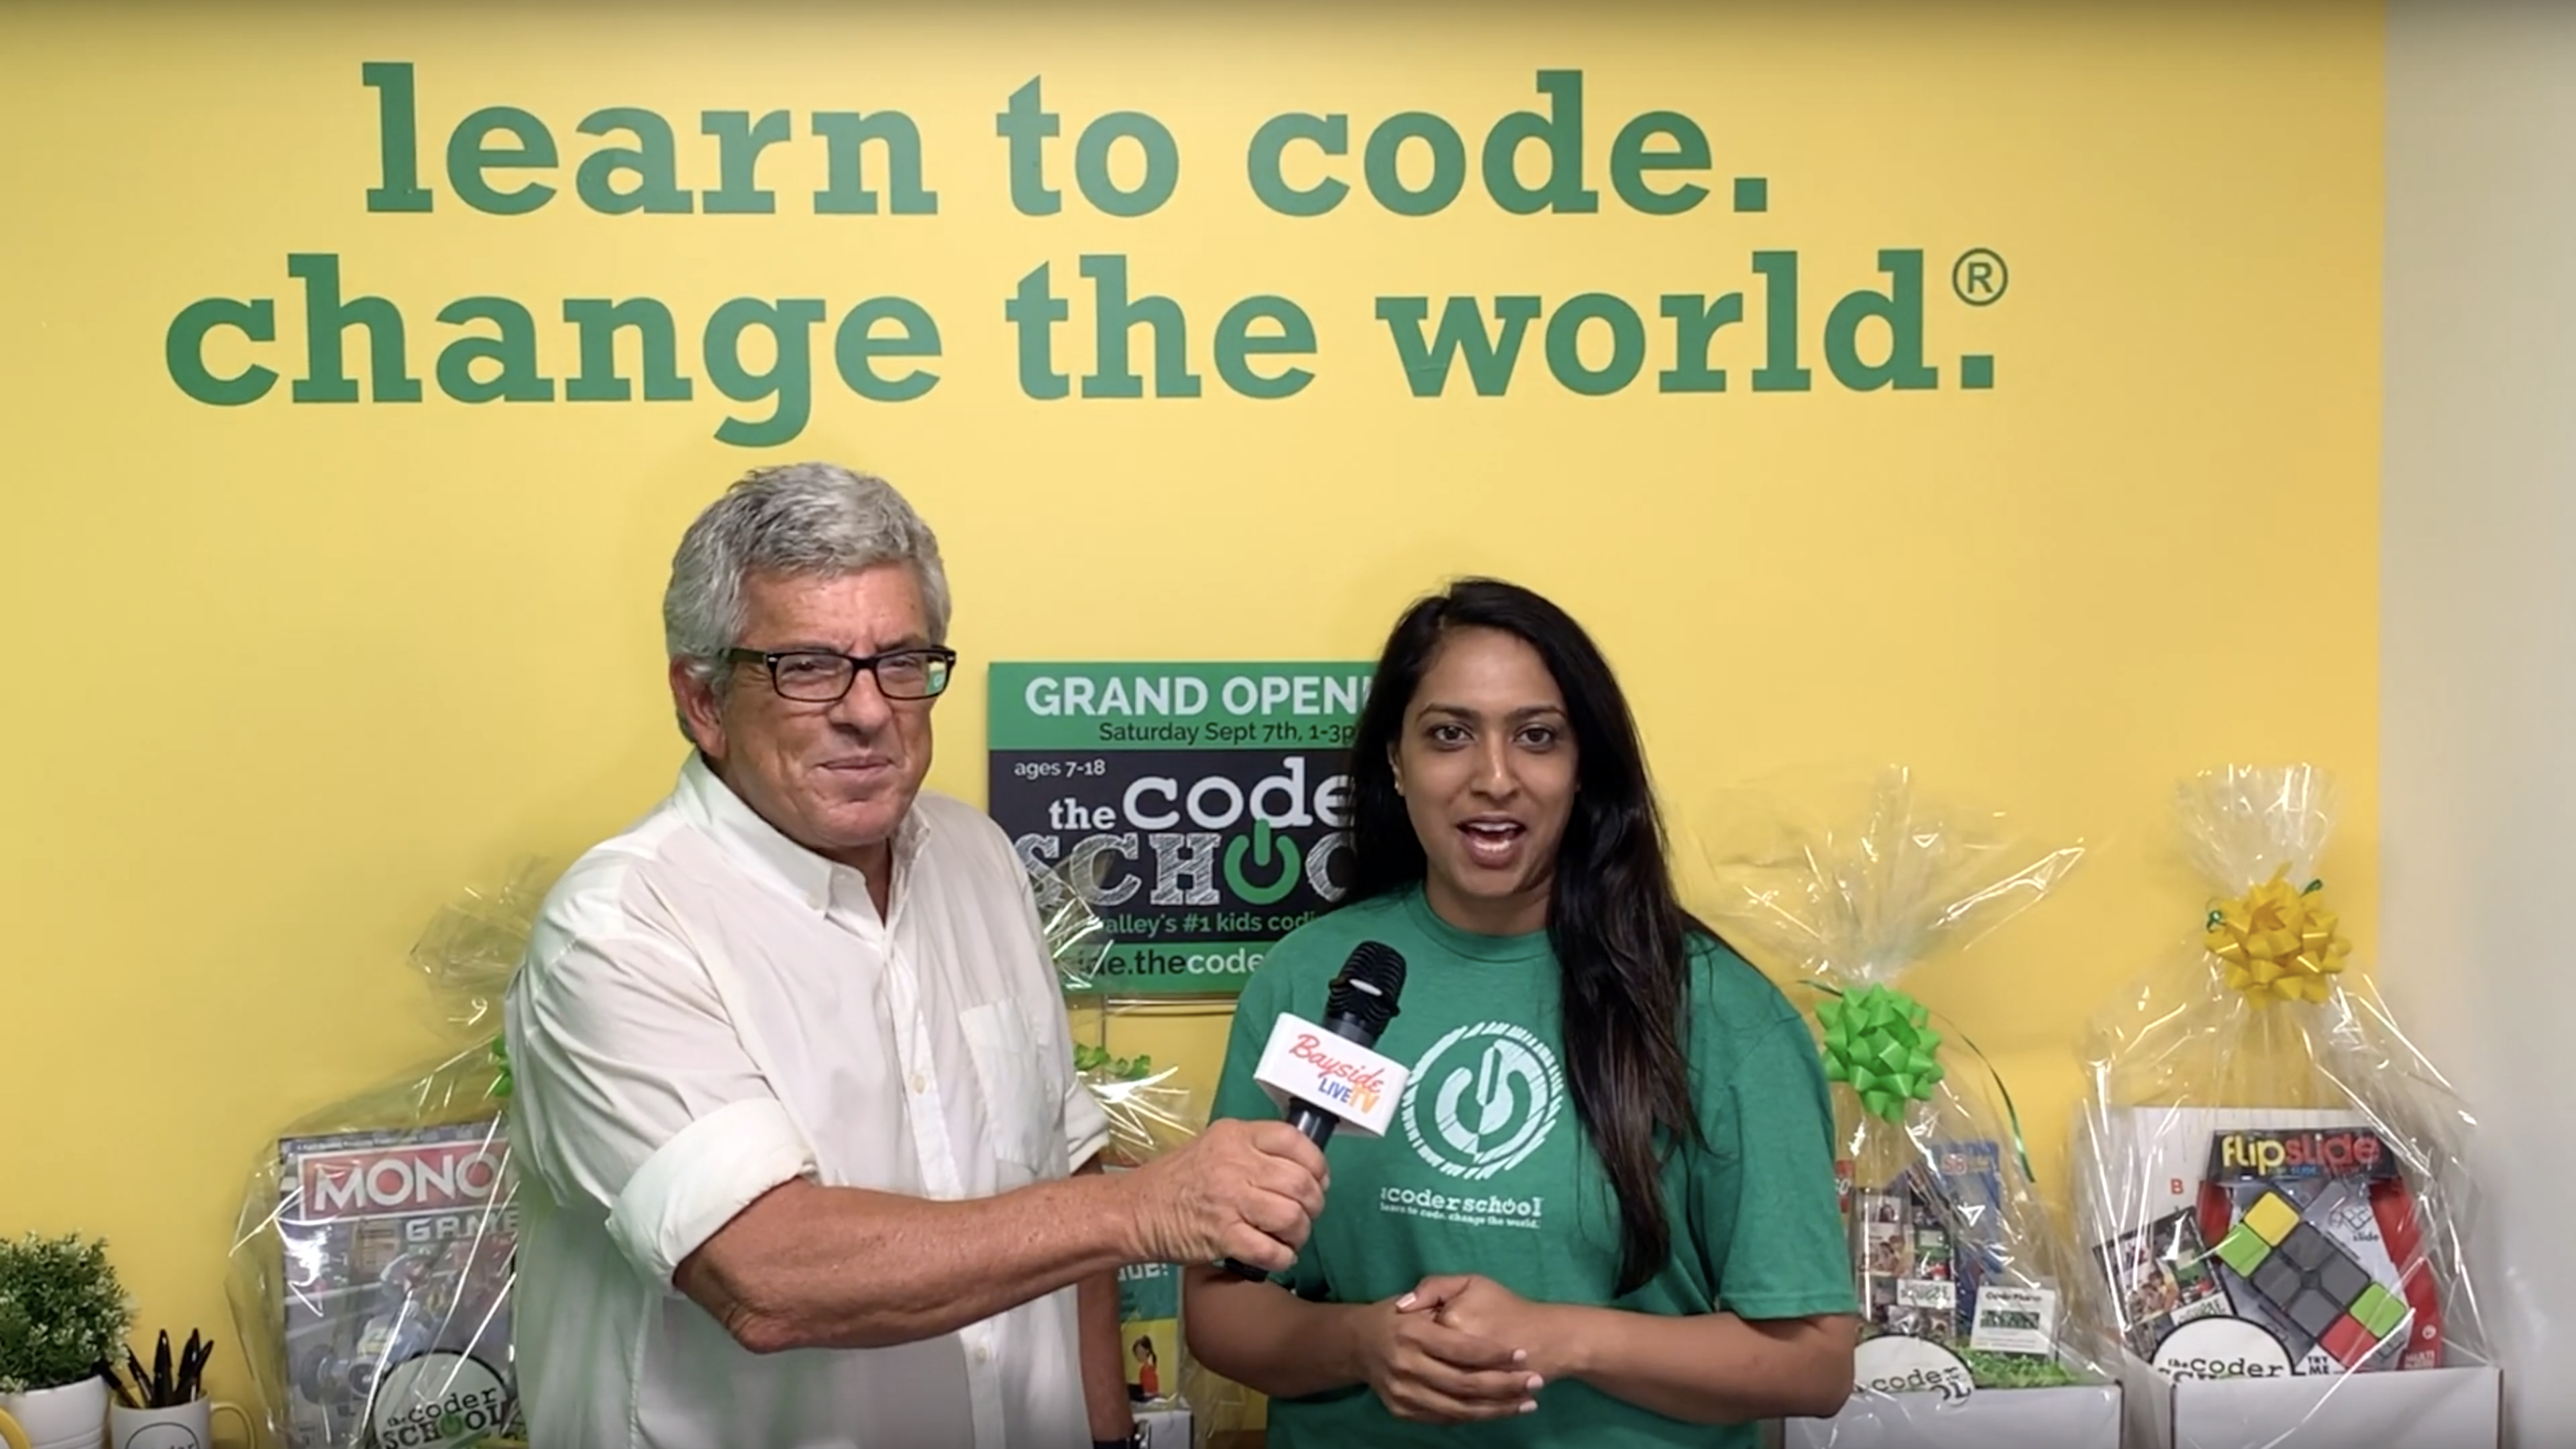 Coding Education Comes To Bayside